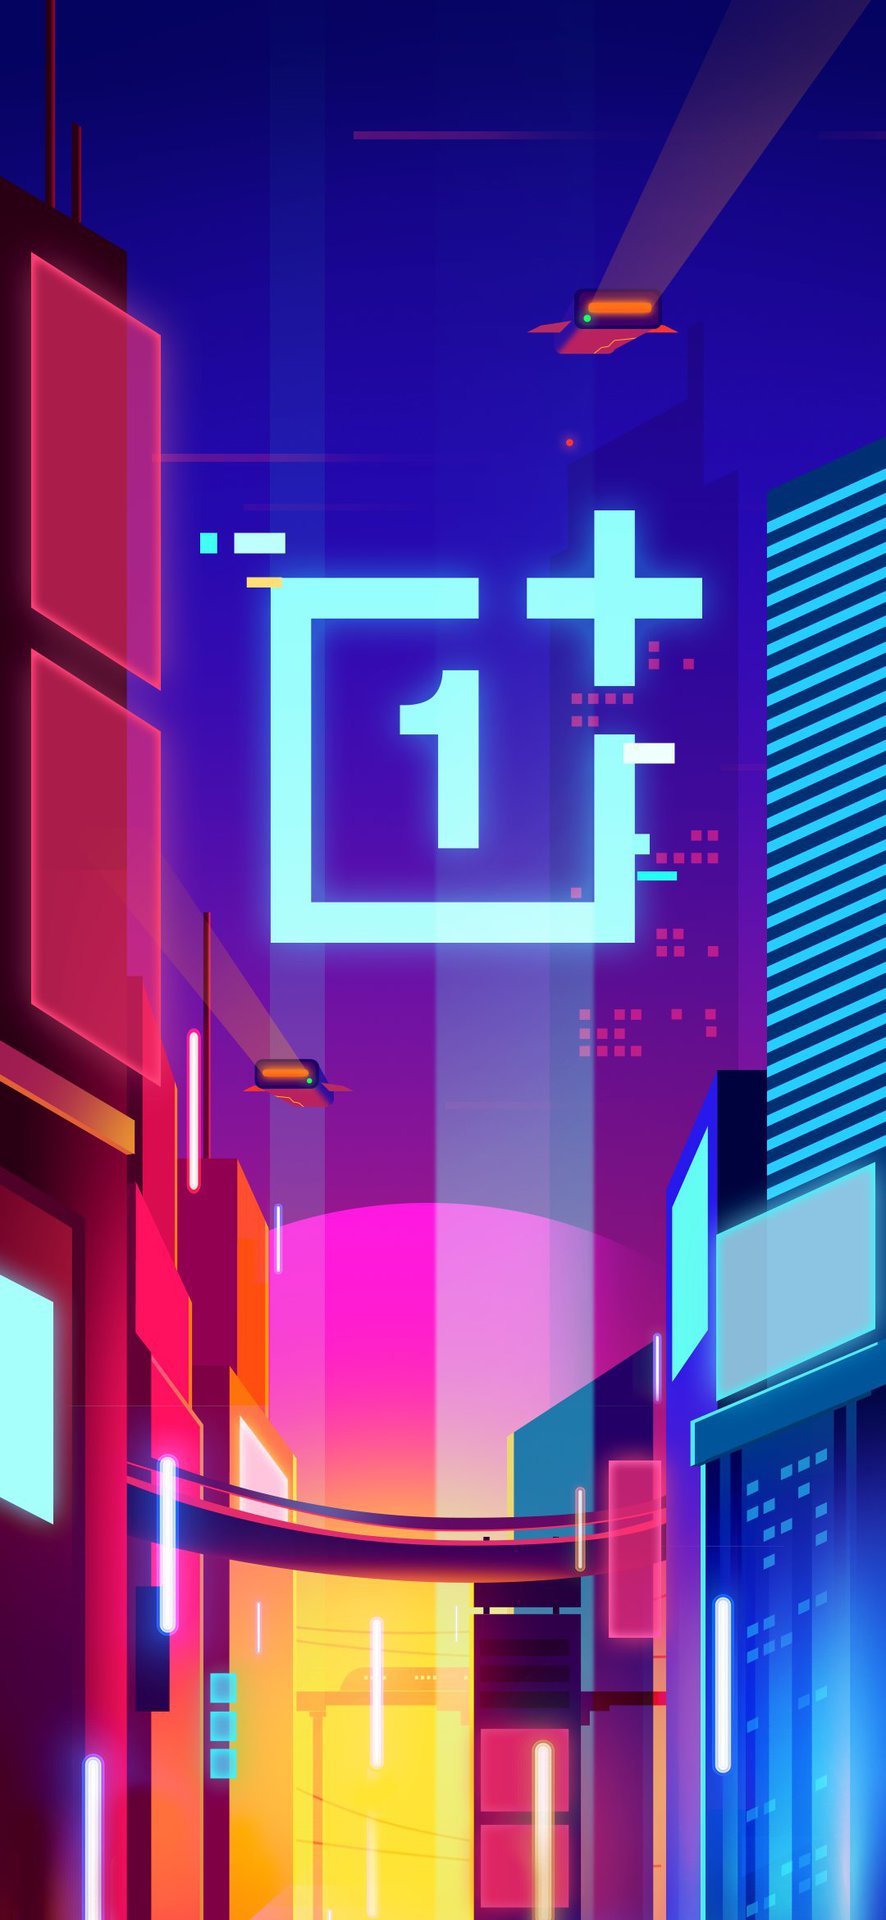 OnePlus wallpapers now with new branding - Android Authority